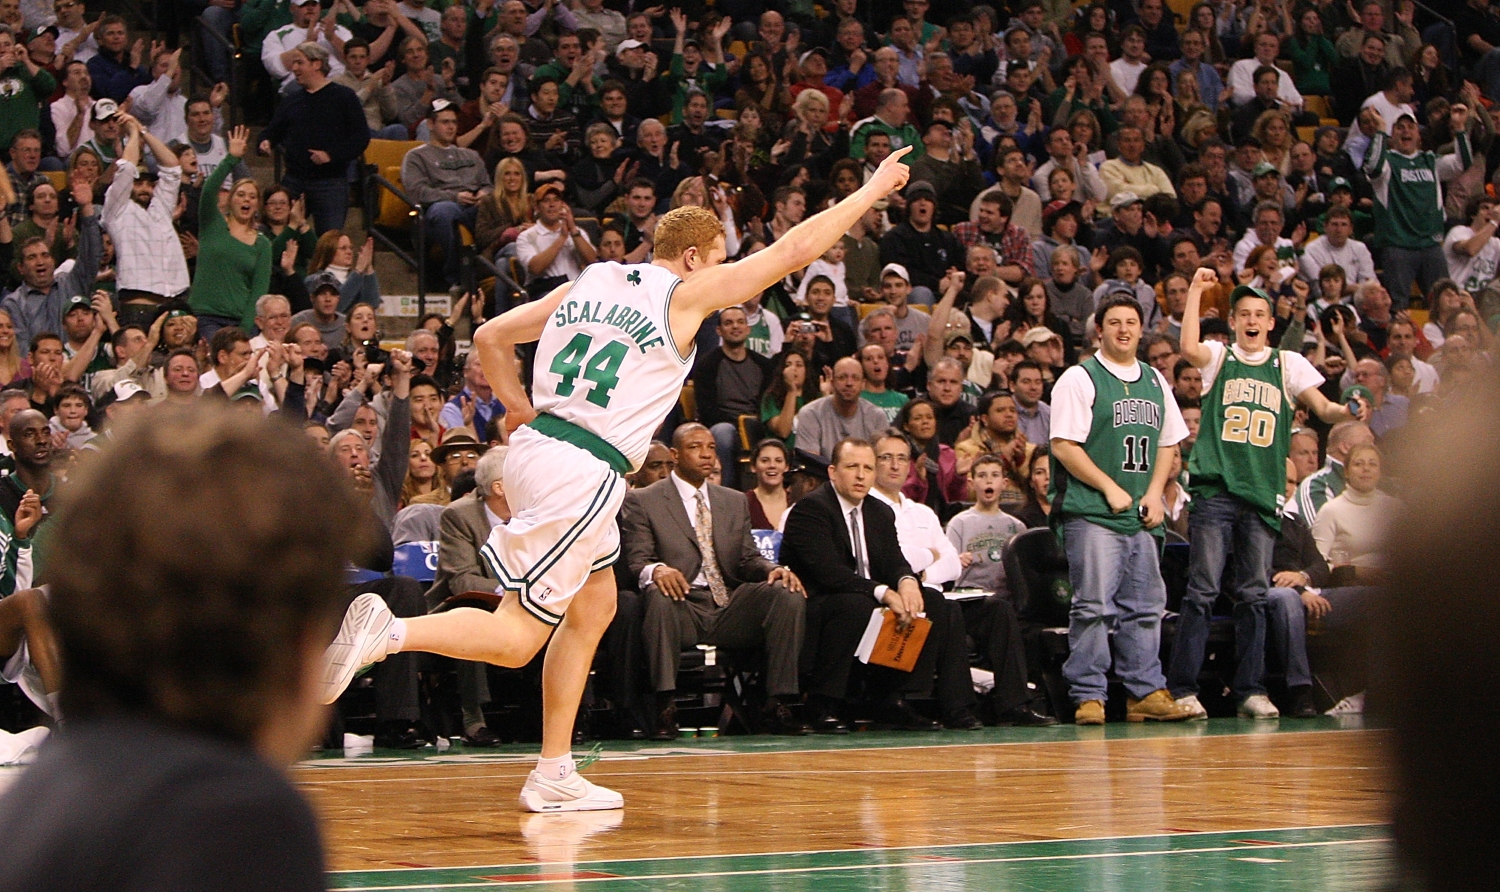 Brian Scalabrine celebrates as he runs down the court as a member of the Boston Celtics.